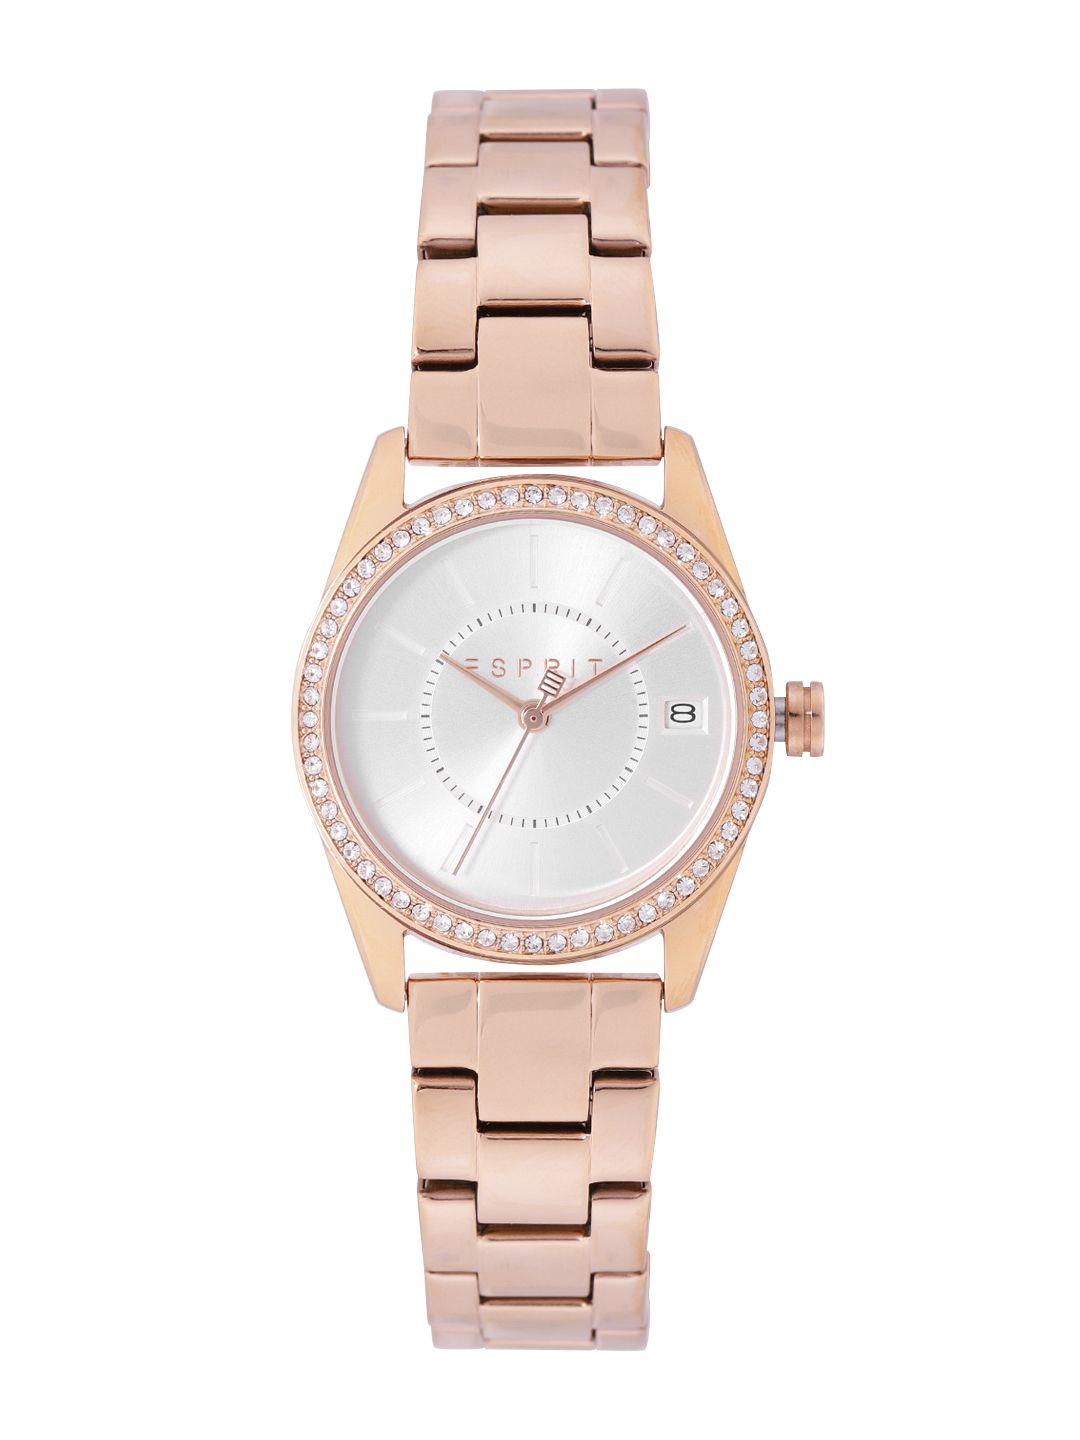 ESPRIT Women Silver-Toned Dial & Rose Gold Toned Straps Analogue Watch ES1L195M0105 Price in India